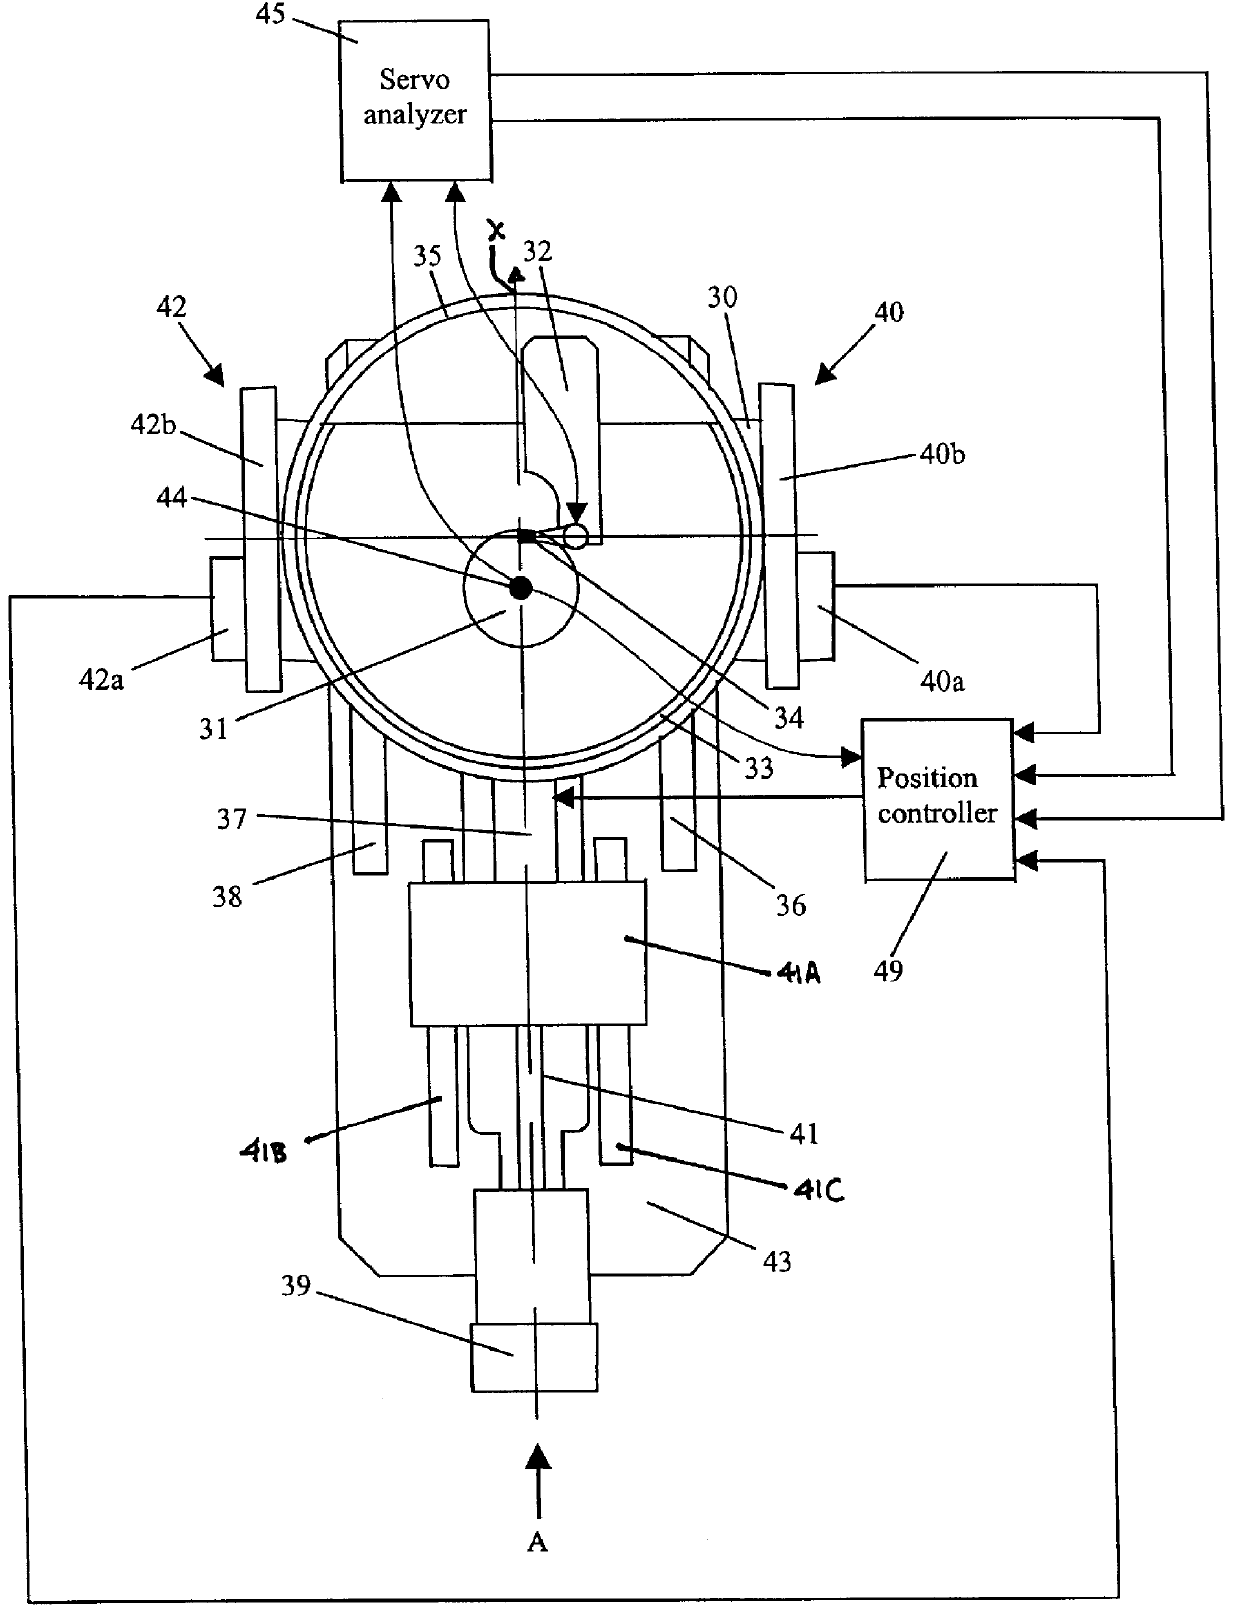 Head and disk tester with a thermal drift-compensated closed-loop positioning system